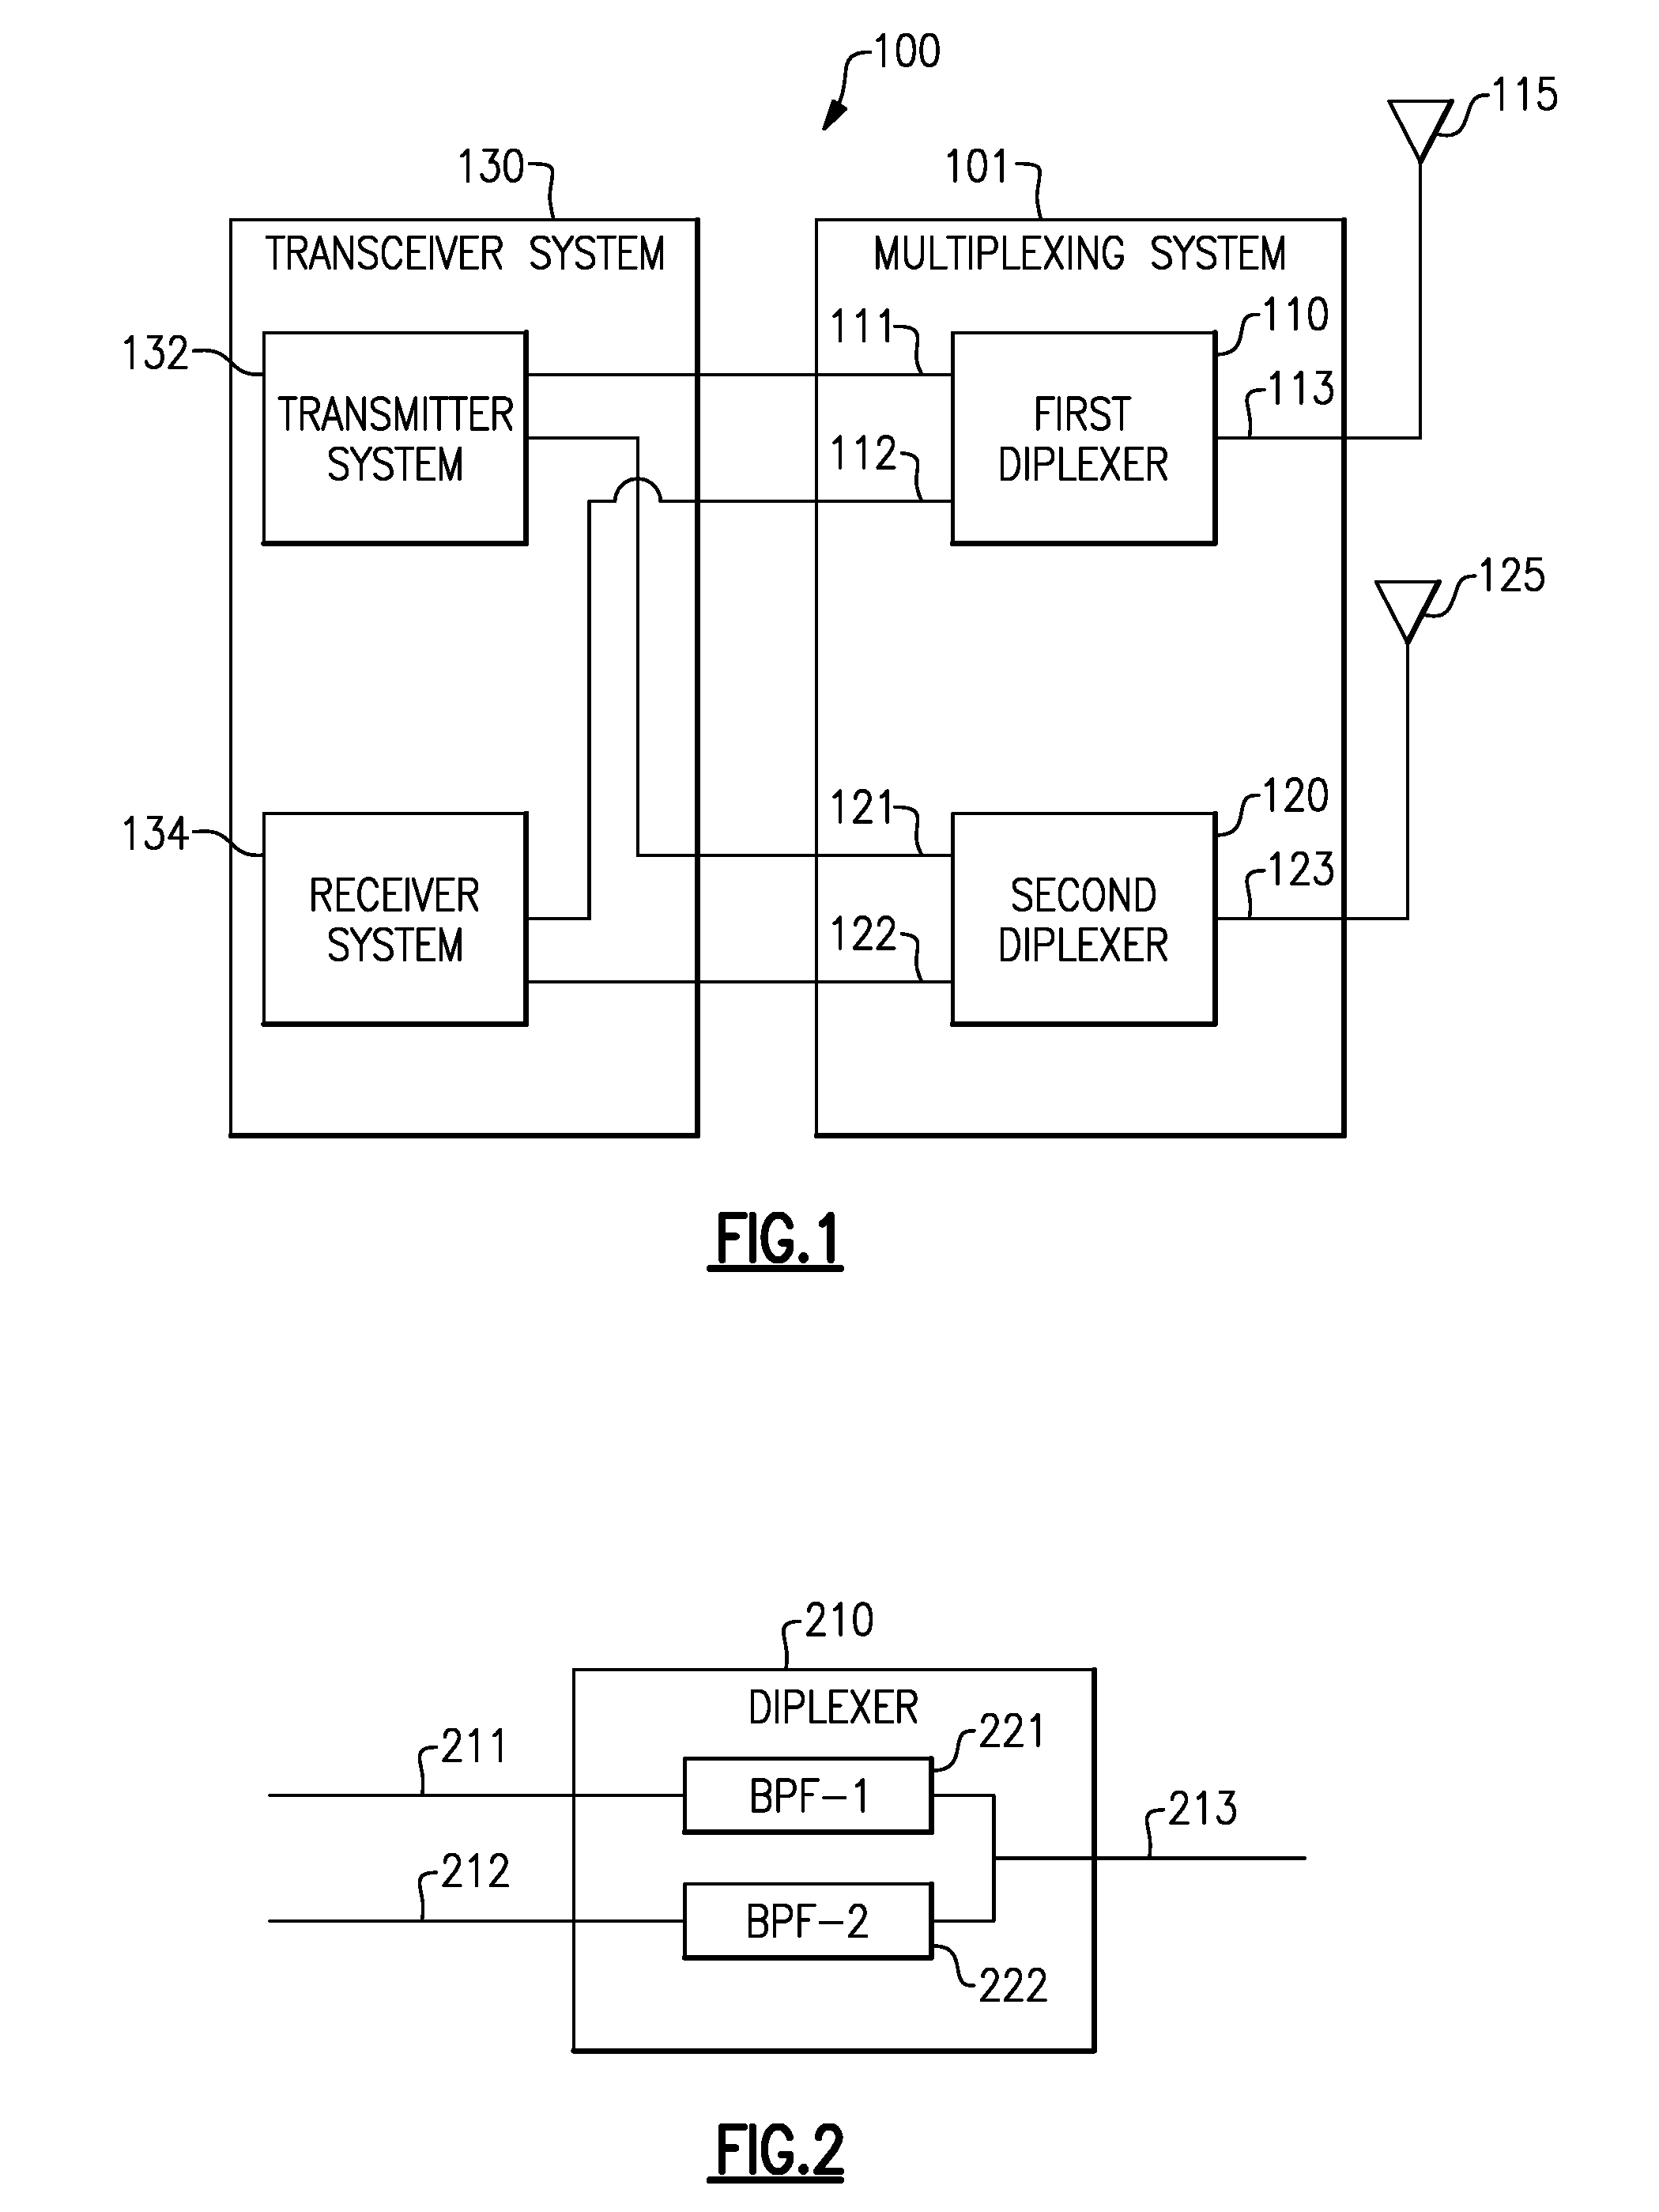 Carrier aggregation using diplexers